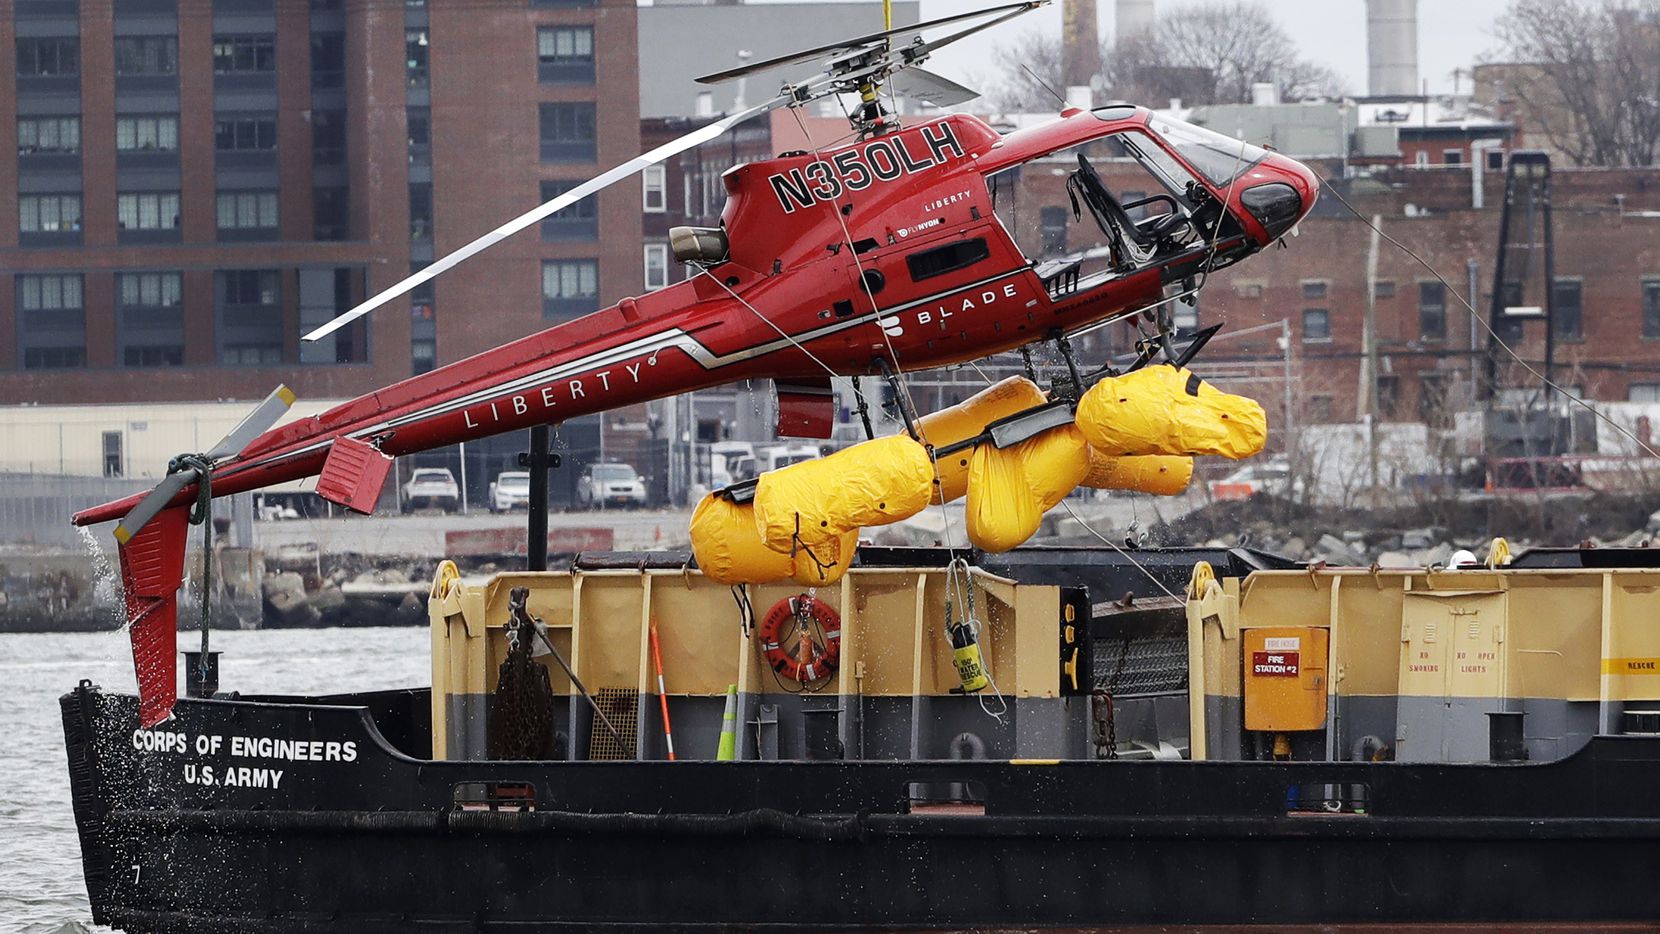 A helicopter is hoisted by crane from the East River onto a barge, Monday, March 12, 2018, in New York. The pilot was able to escape the Sunday night crash after the aircraft flipped upside down in the water killing several passengers, officials said. (AP Photo/Mark Lennihan)